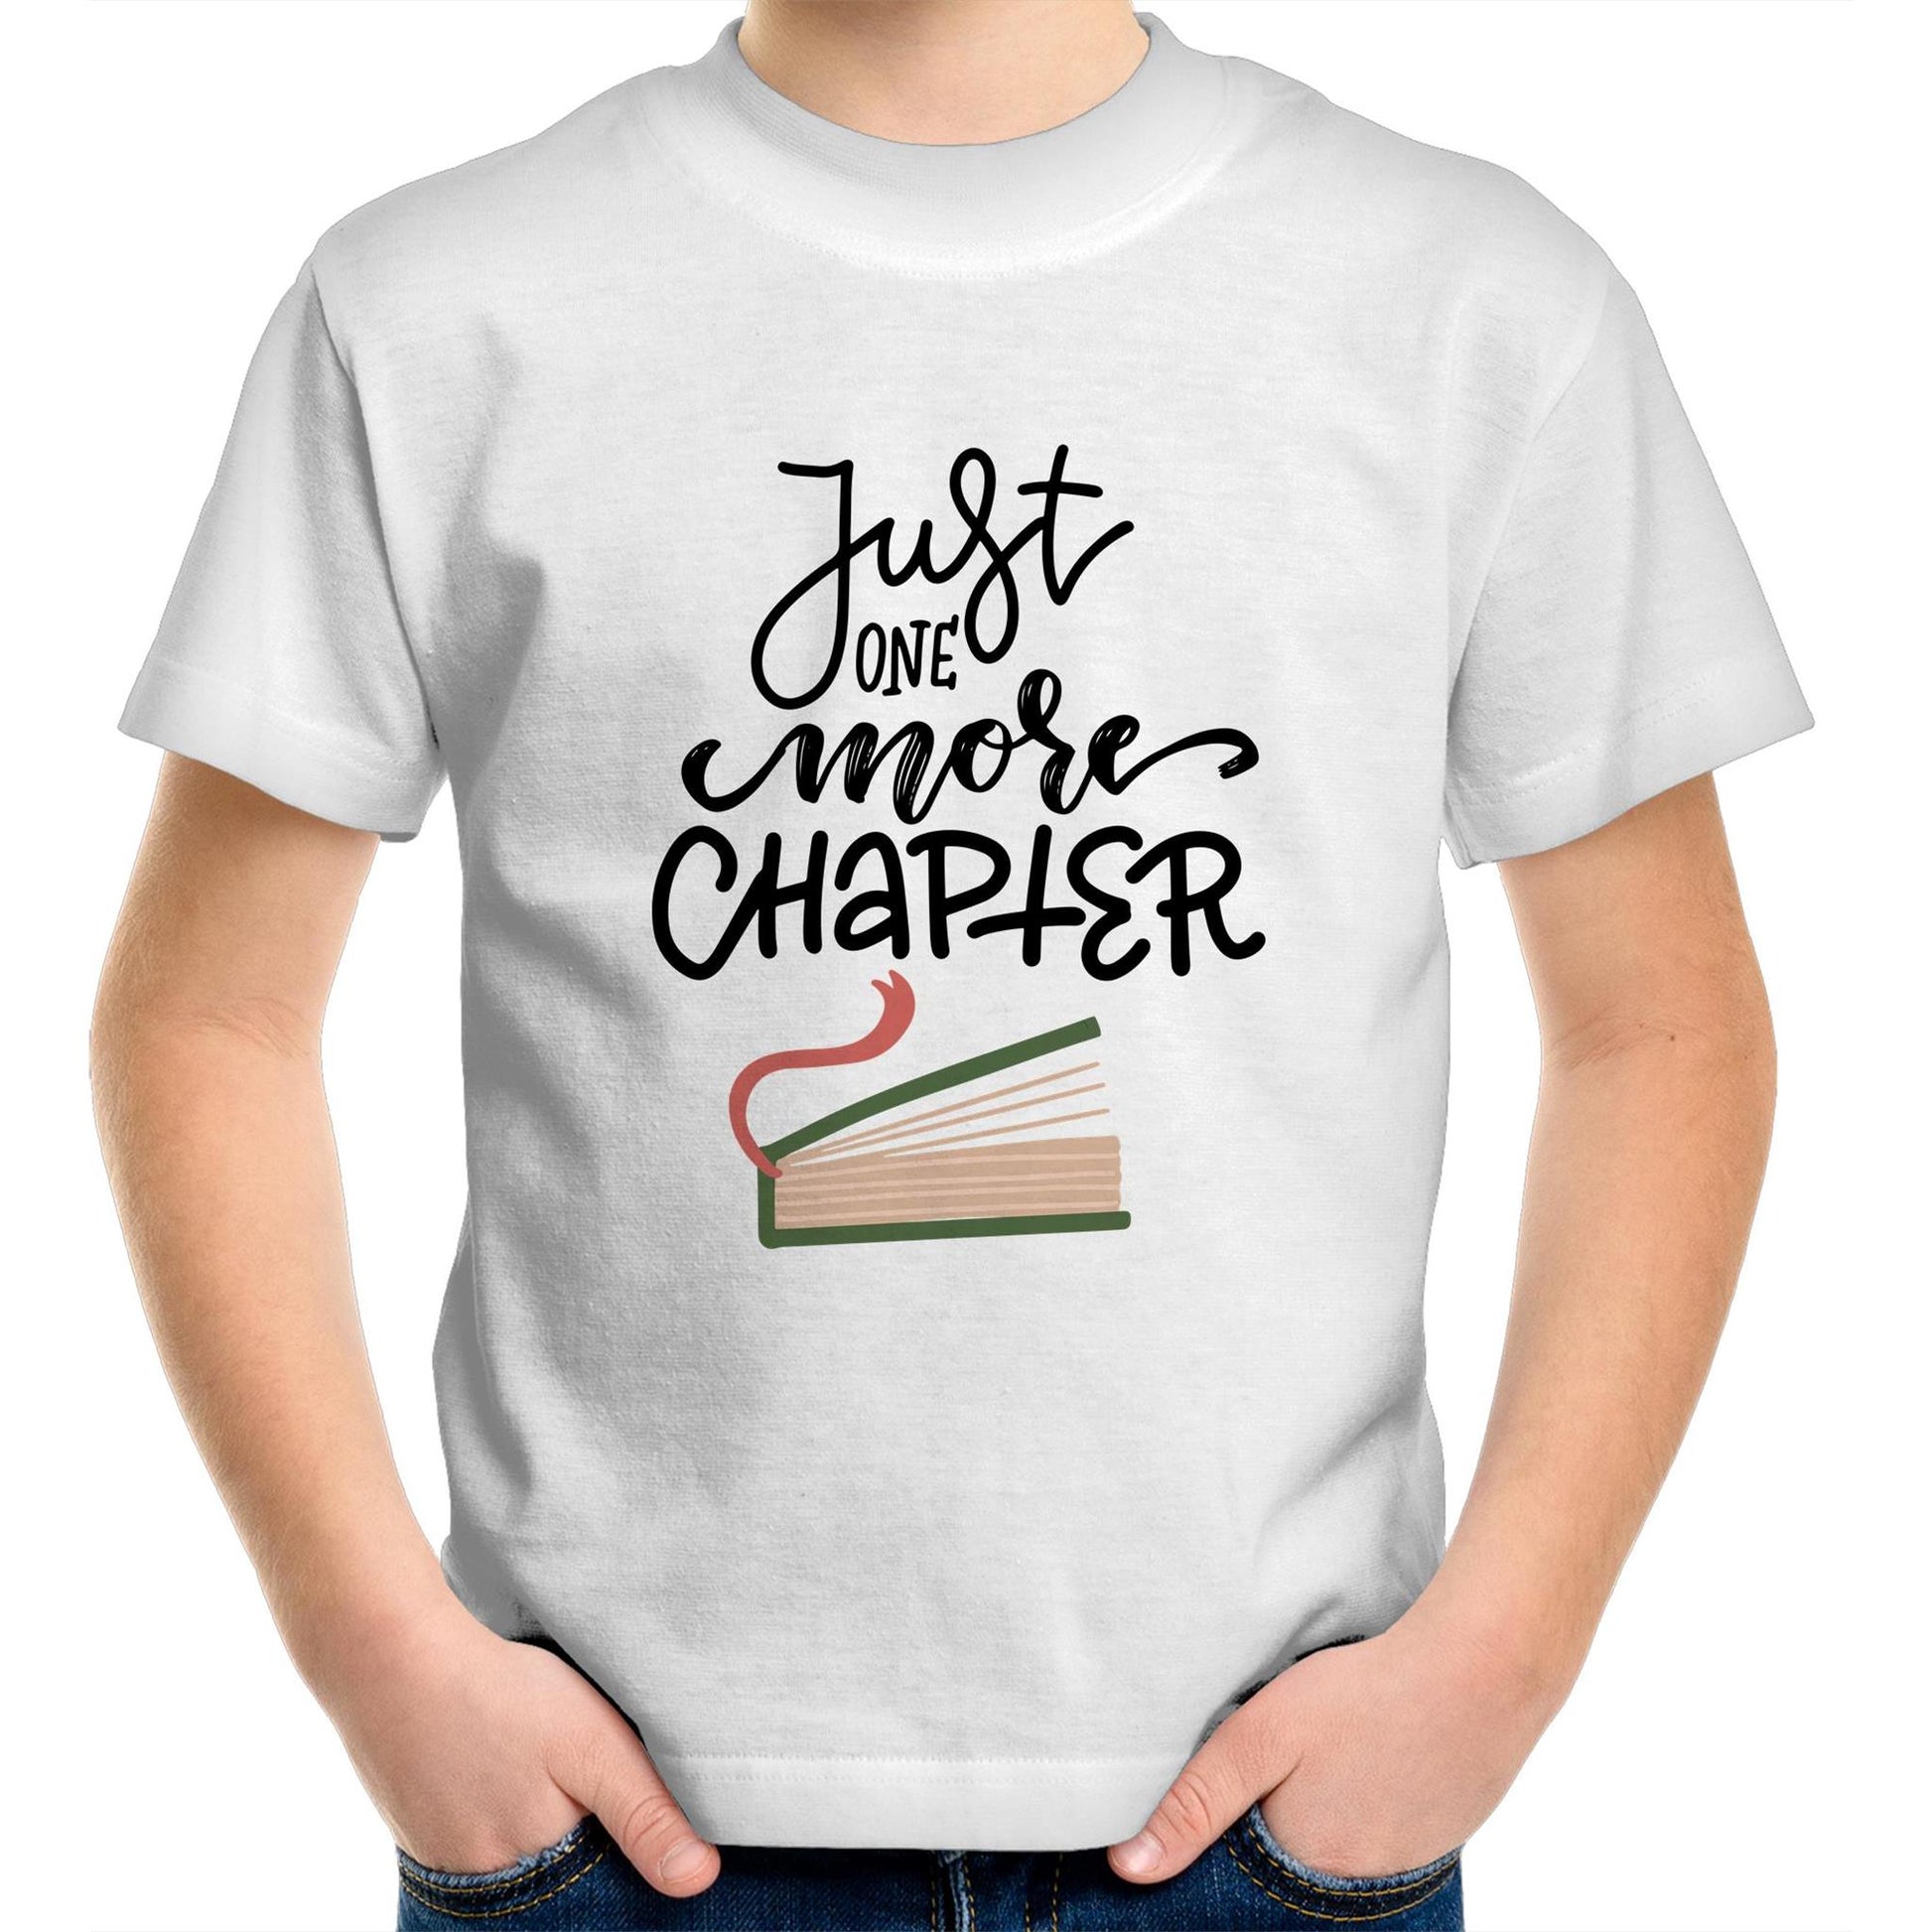 Just One More Chapter - Kids Youth Crew T-Shirt White Kids Youth T-shirt Reading